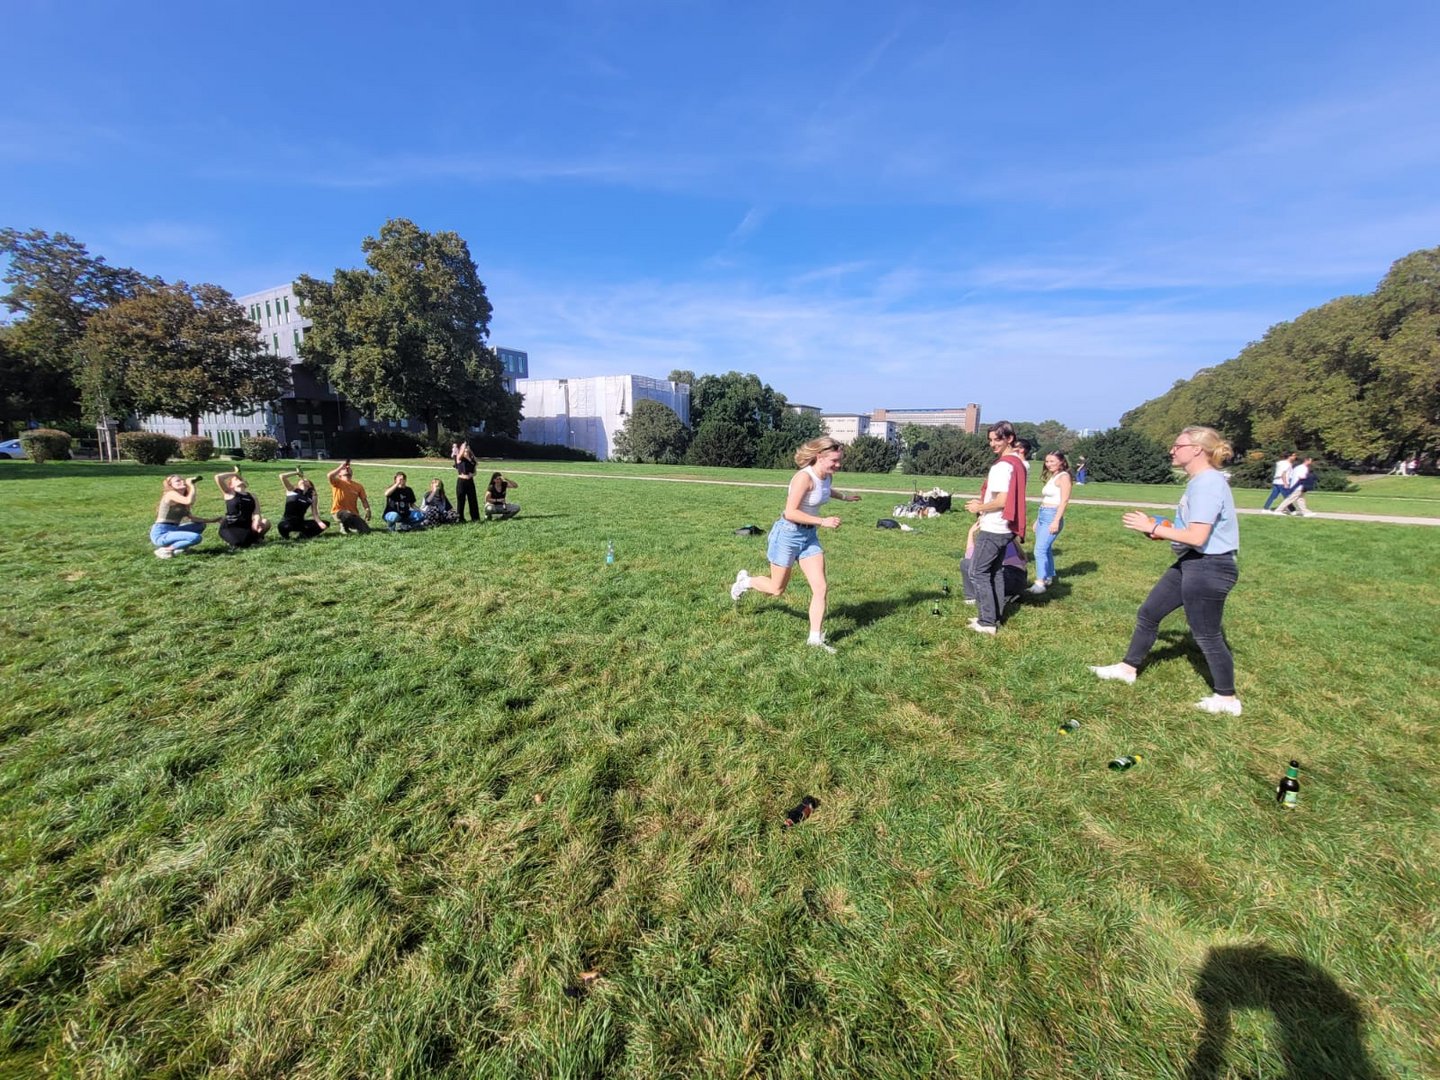 The picture shows a bunch of people in a parc. On the left, some people are kneeling on the ground and drinking from bottles. In the middle you can see one person running towards another group of people on the right.